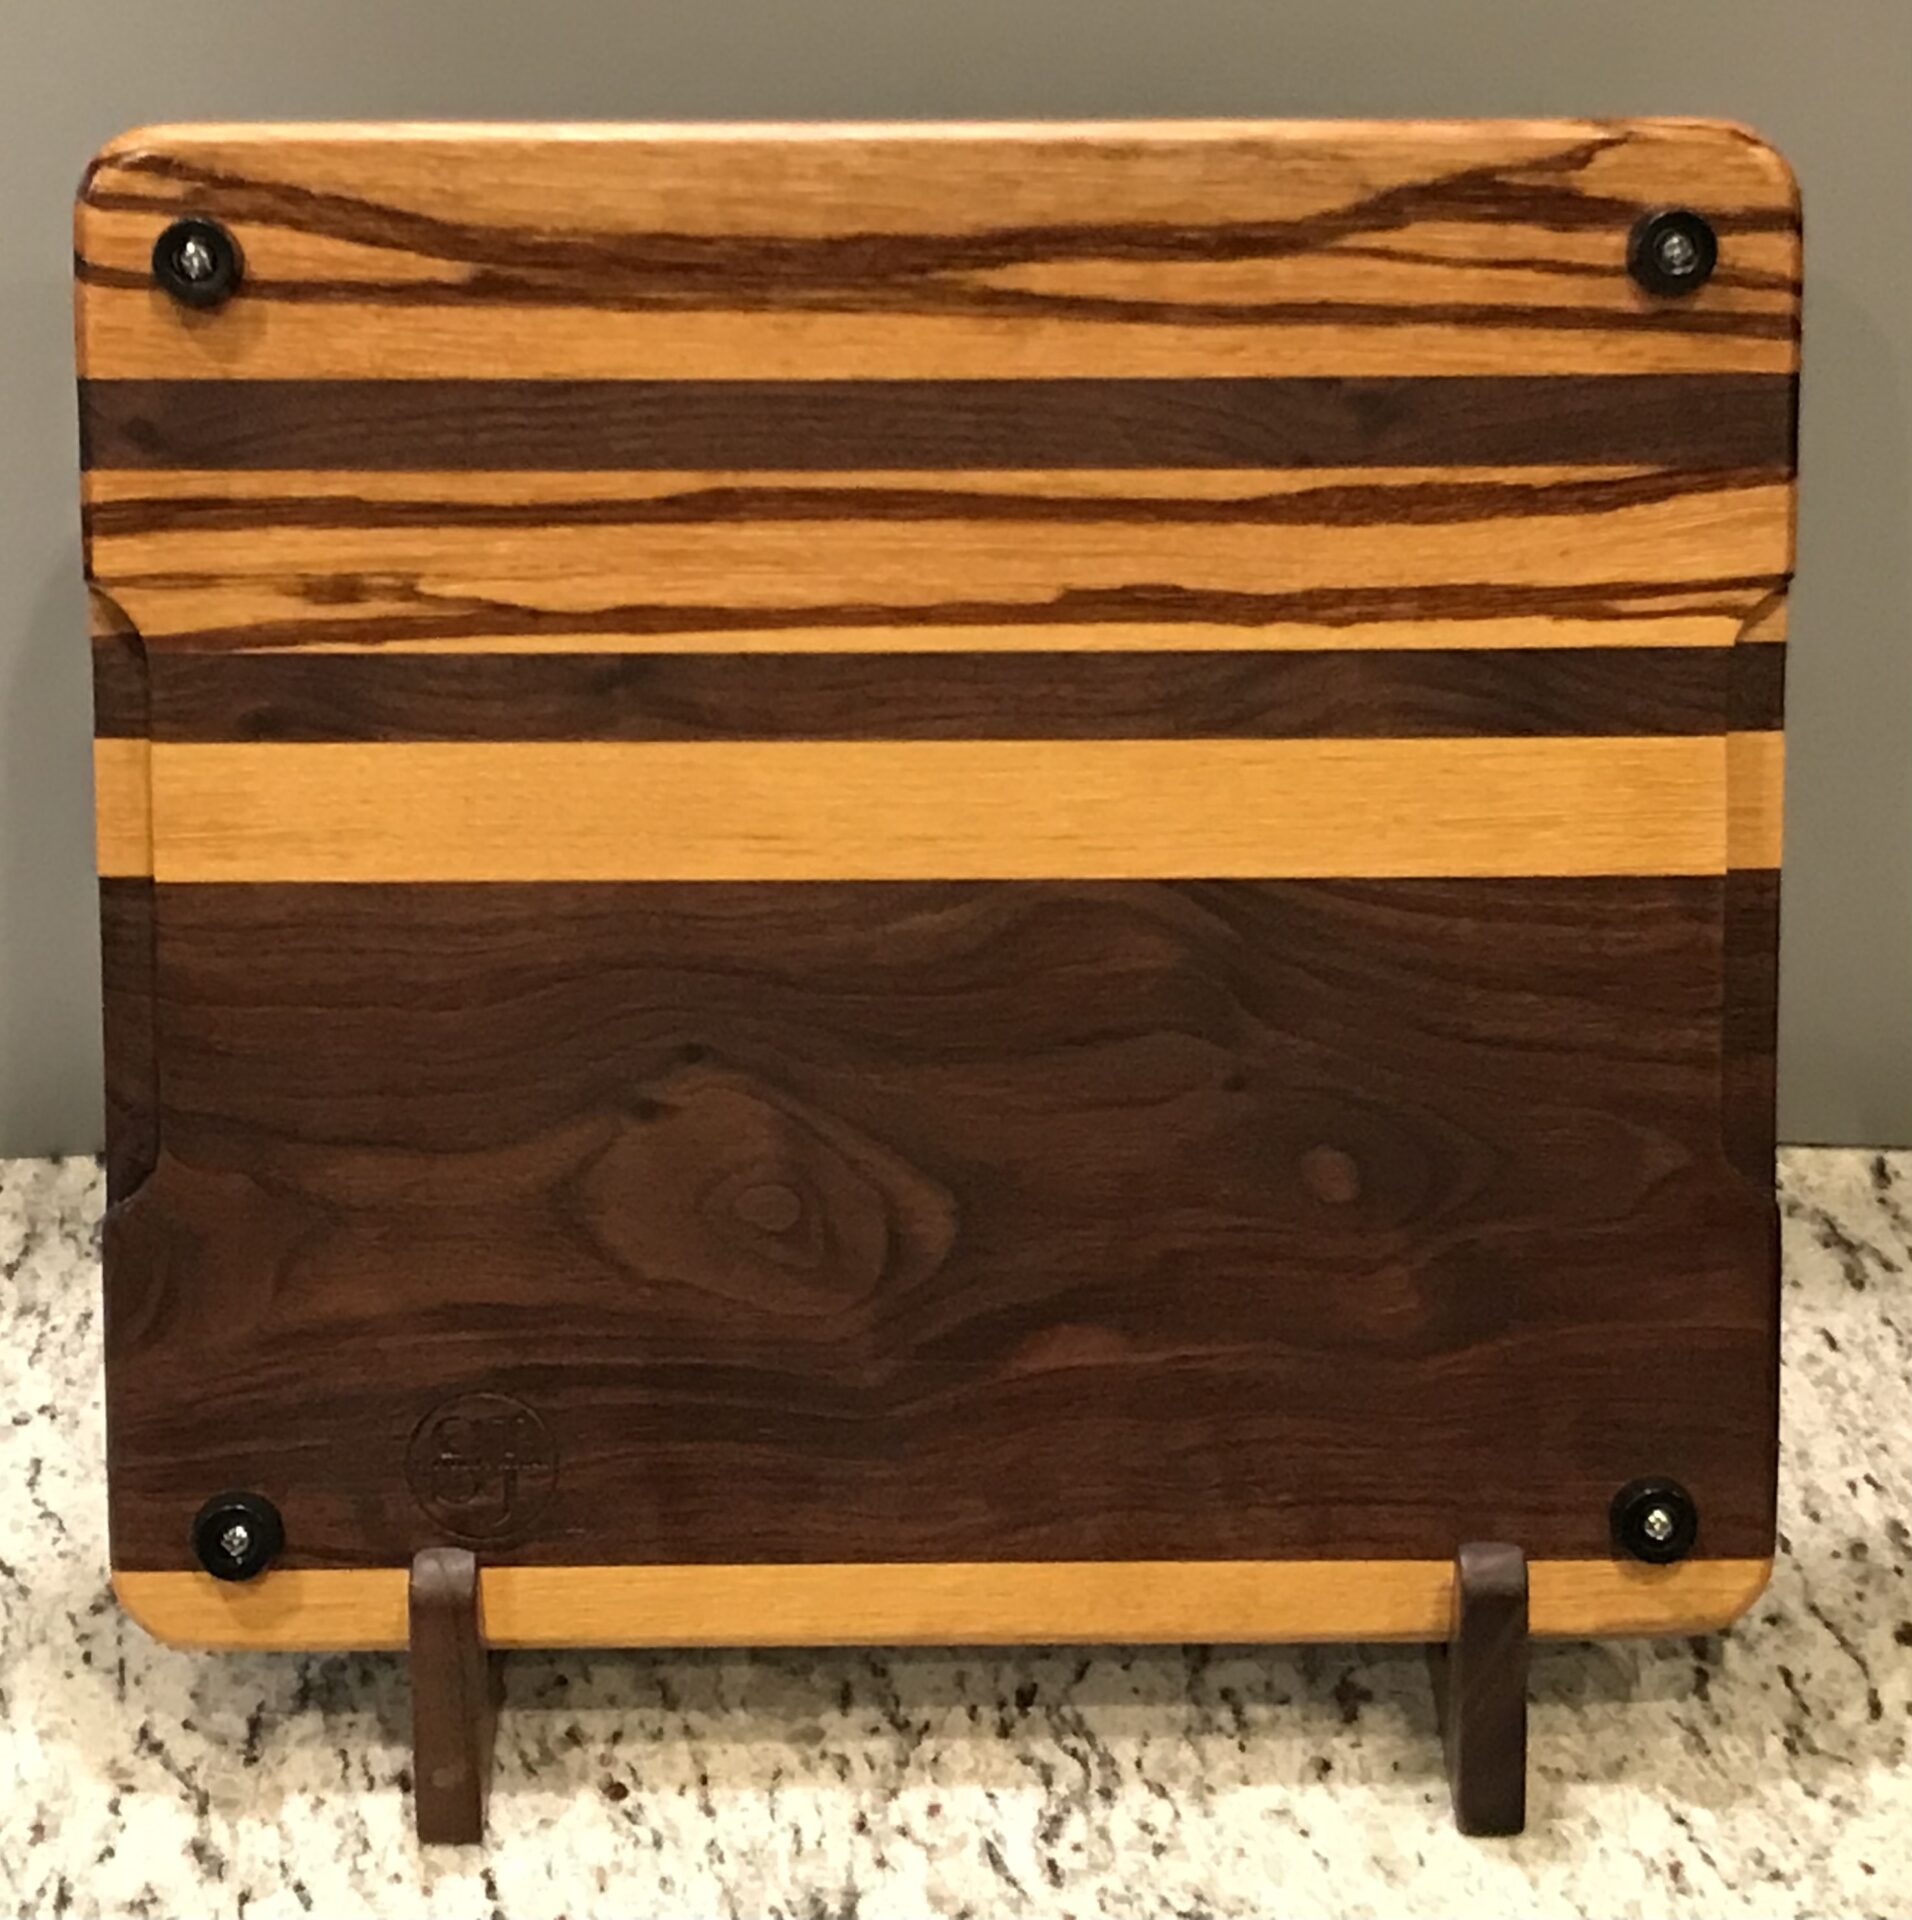 Hand-Crafted Exotic Hardwood Cutting Board - Zebrawood, Mapl